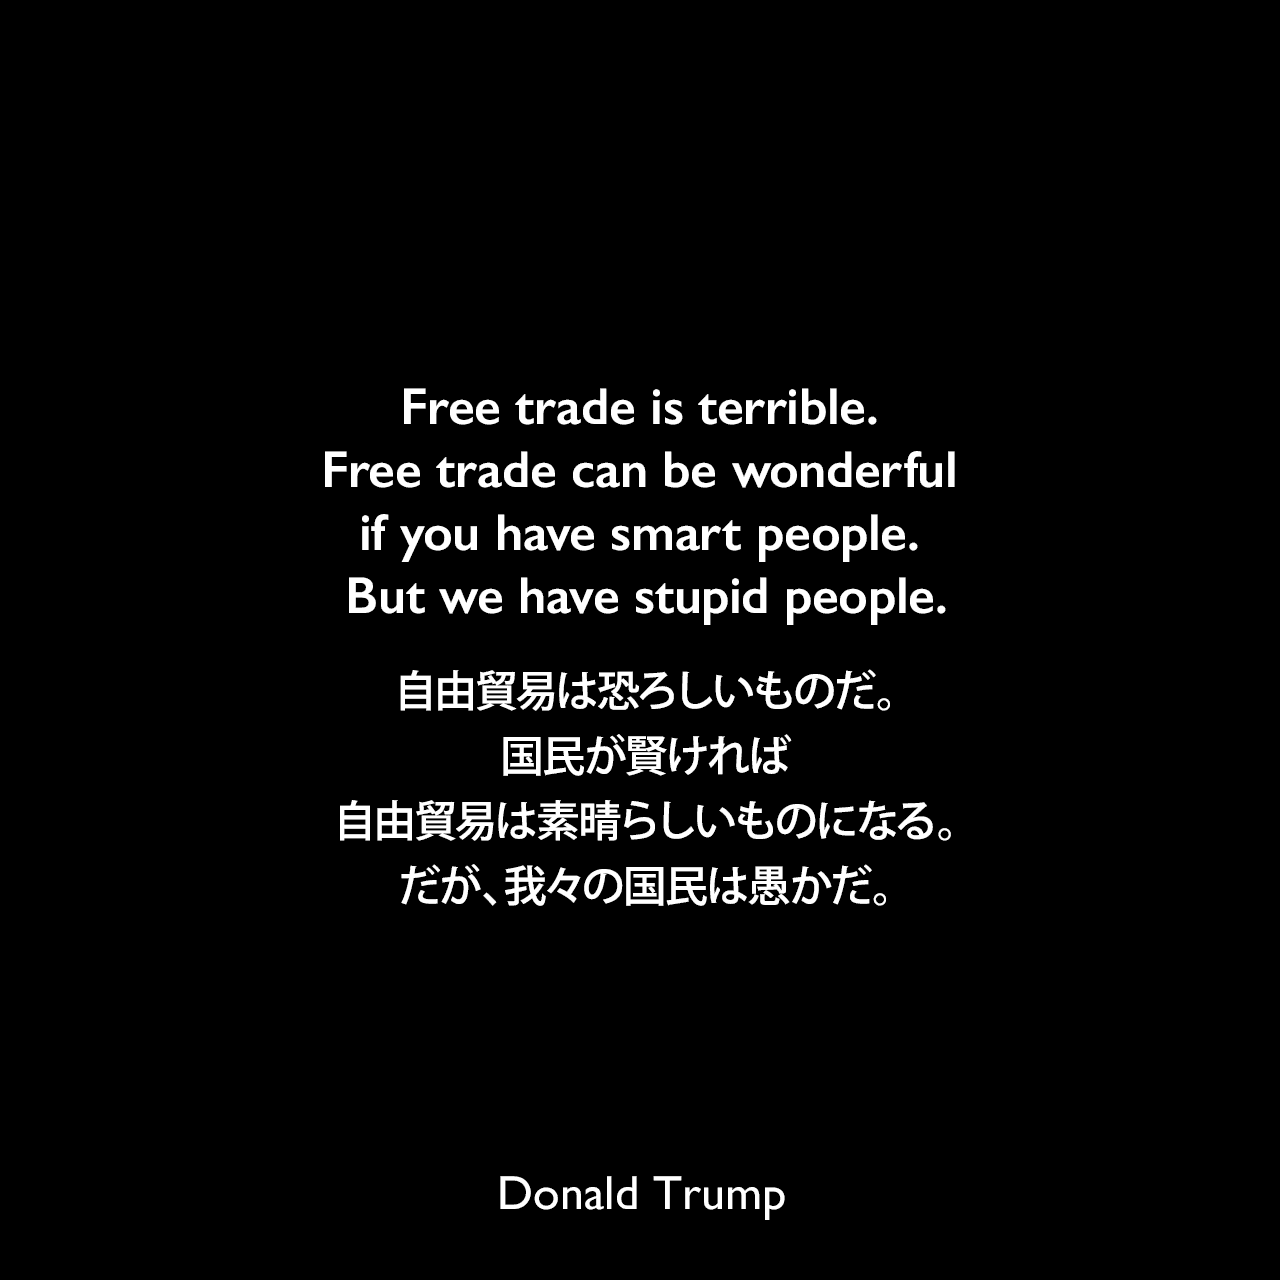 Free trade is terrible. Free trade can be wonderful if you have smart people. But we have stupid people.自由貿易は恐ろしいものだ。国民が賢ければ、自由貿易は素晴らしいものになる。だが、我々の国民は愚かだ。Donald Trump